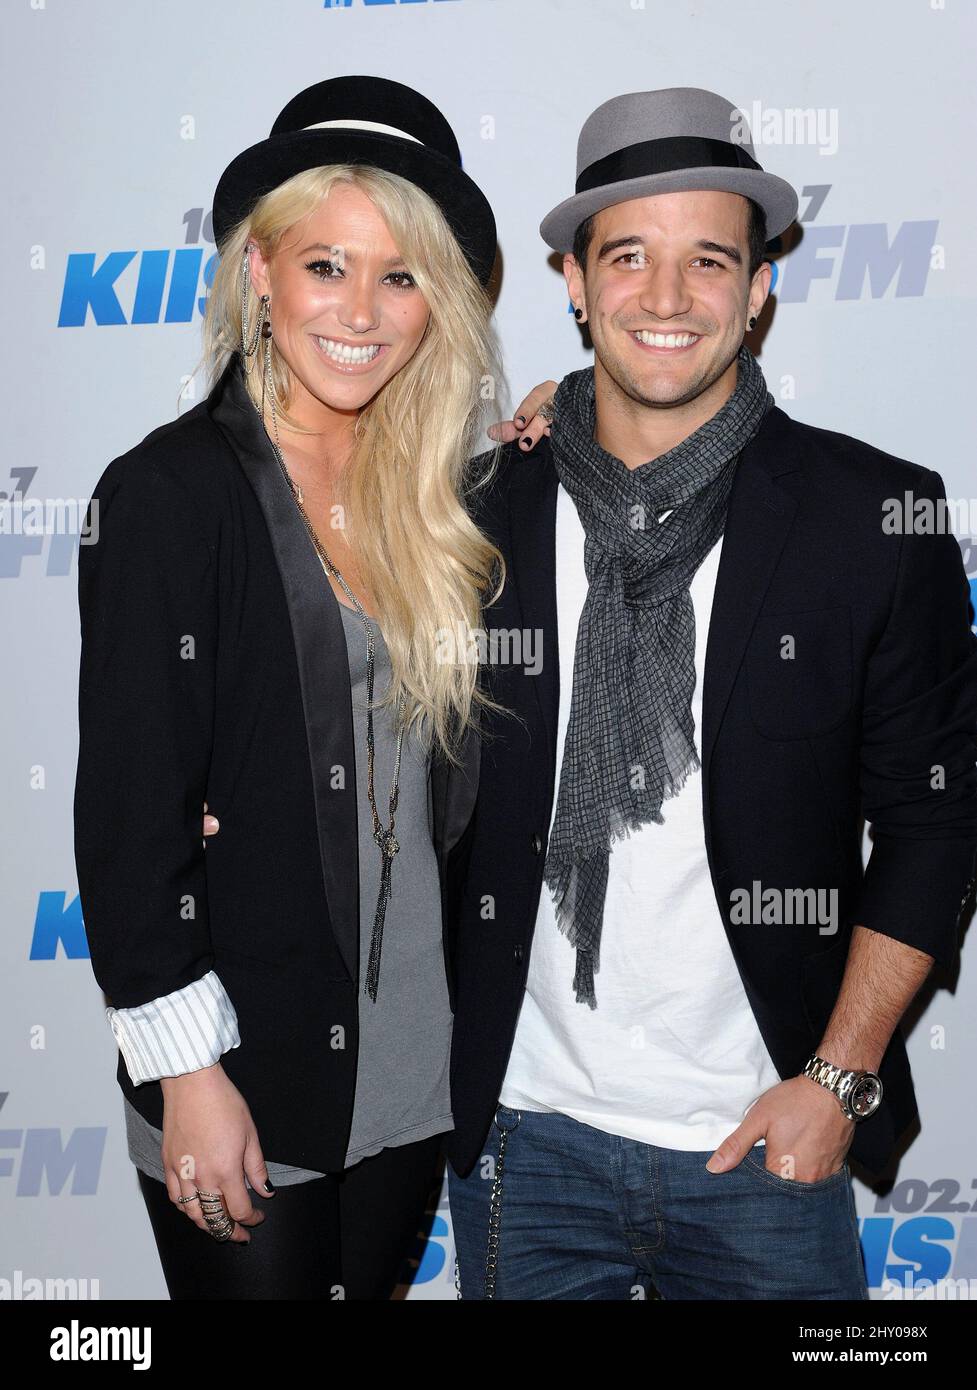 BC Jean and Mark Ballas attending the 2012 KIIS FM 'Jingle Ball' Night 2 held at the Nokia Theatre in Los Angeles, USA. Stock Photo